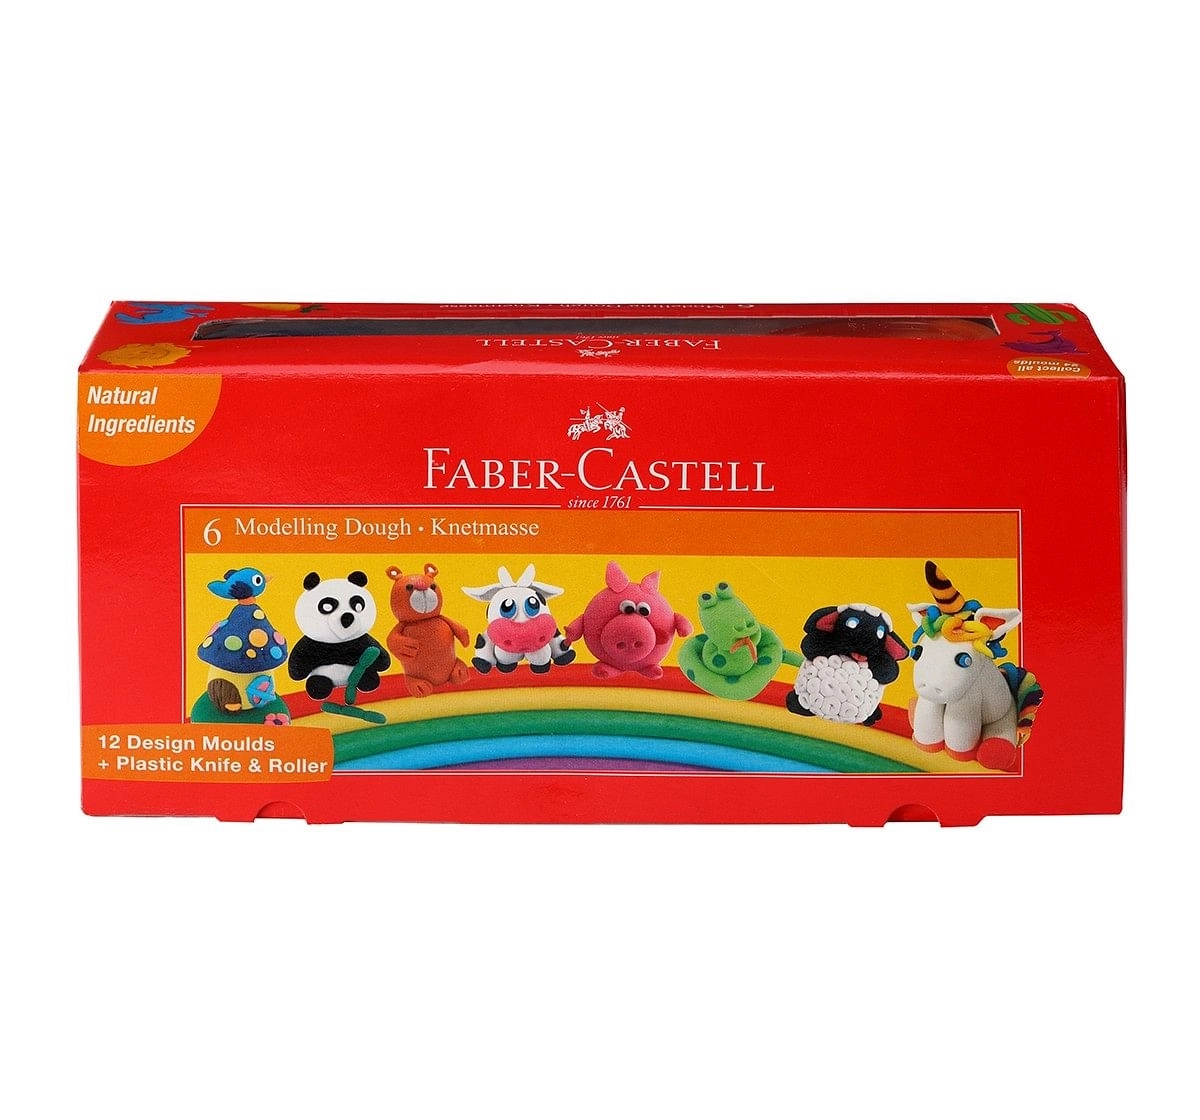 Faber-Castell Modelling dough 50gm pck-6 shades, 3Y+